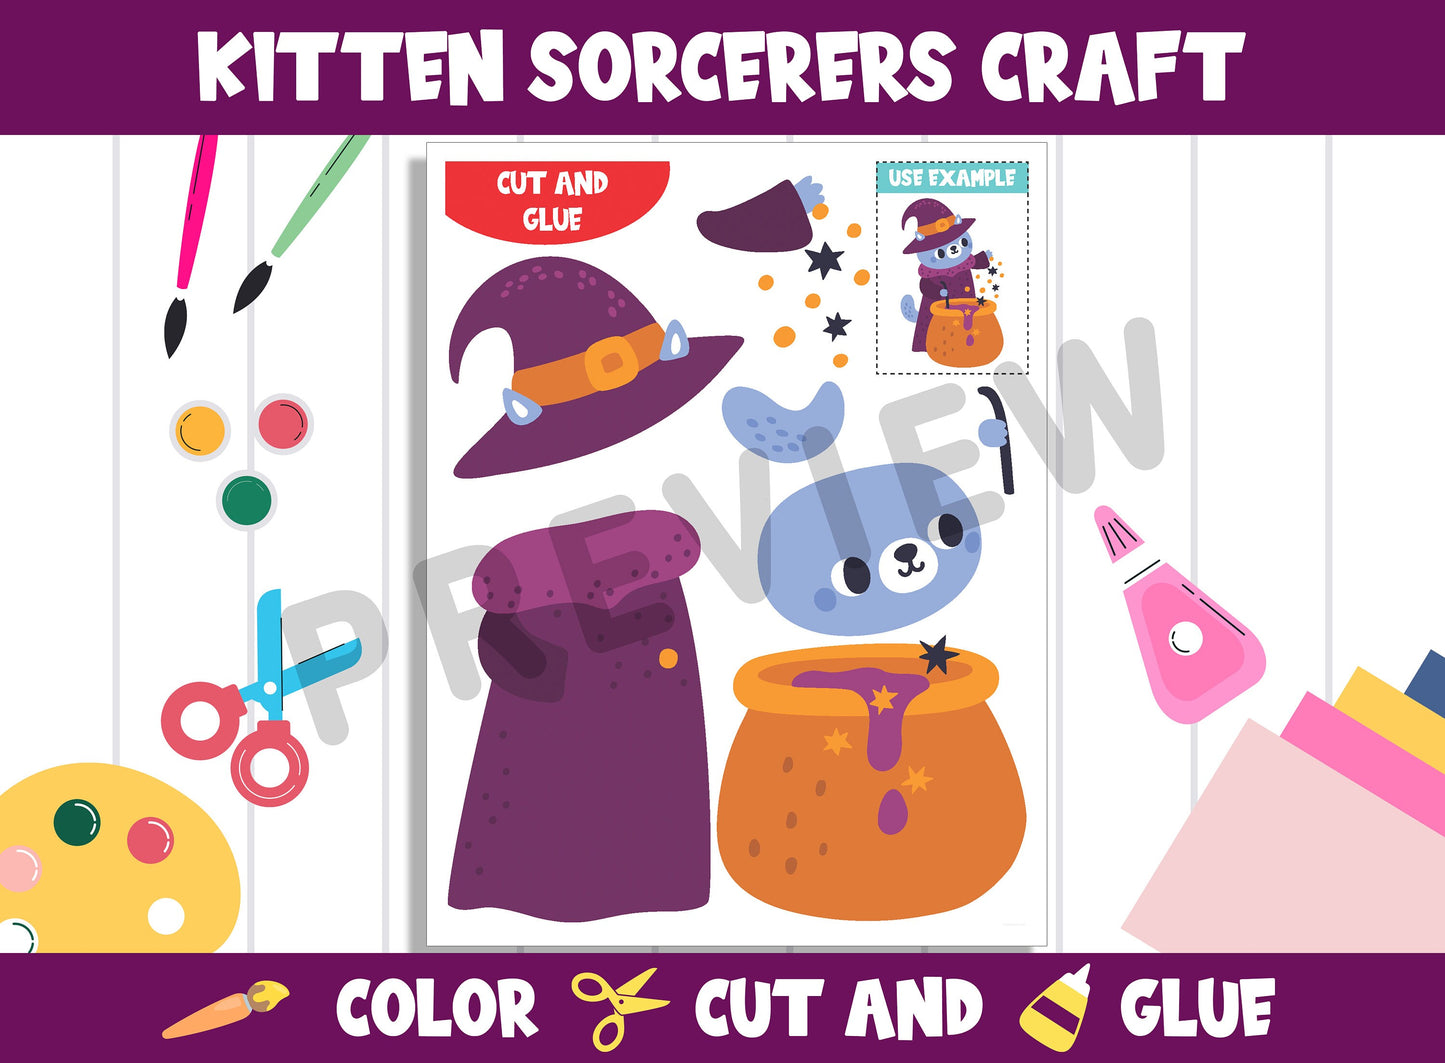 Halloween - Funny Kitten Sorcerers Craft Activity - Color, Cut, and Glue for PreK to 2nd Grade, PDF File, Instant Download